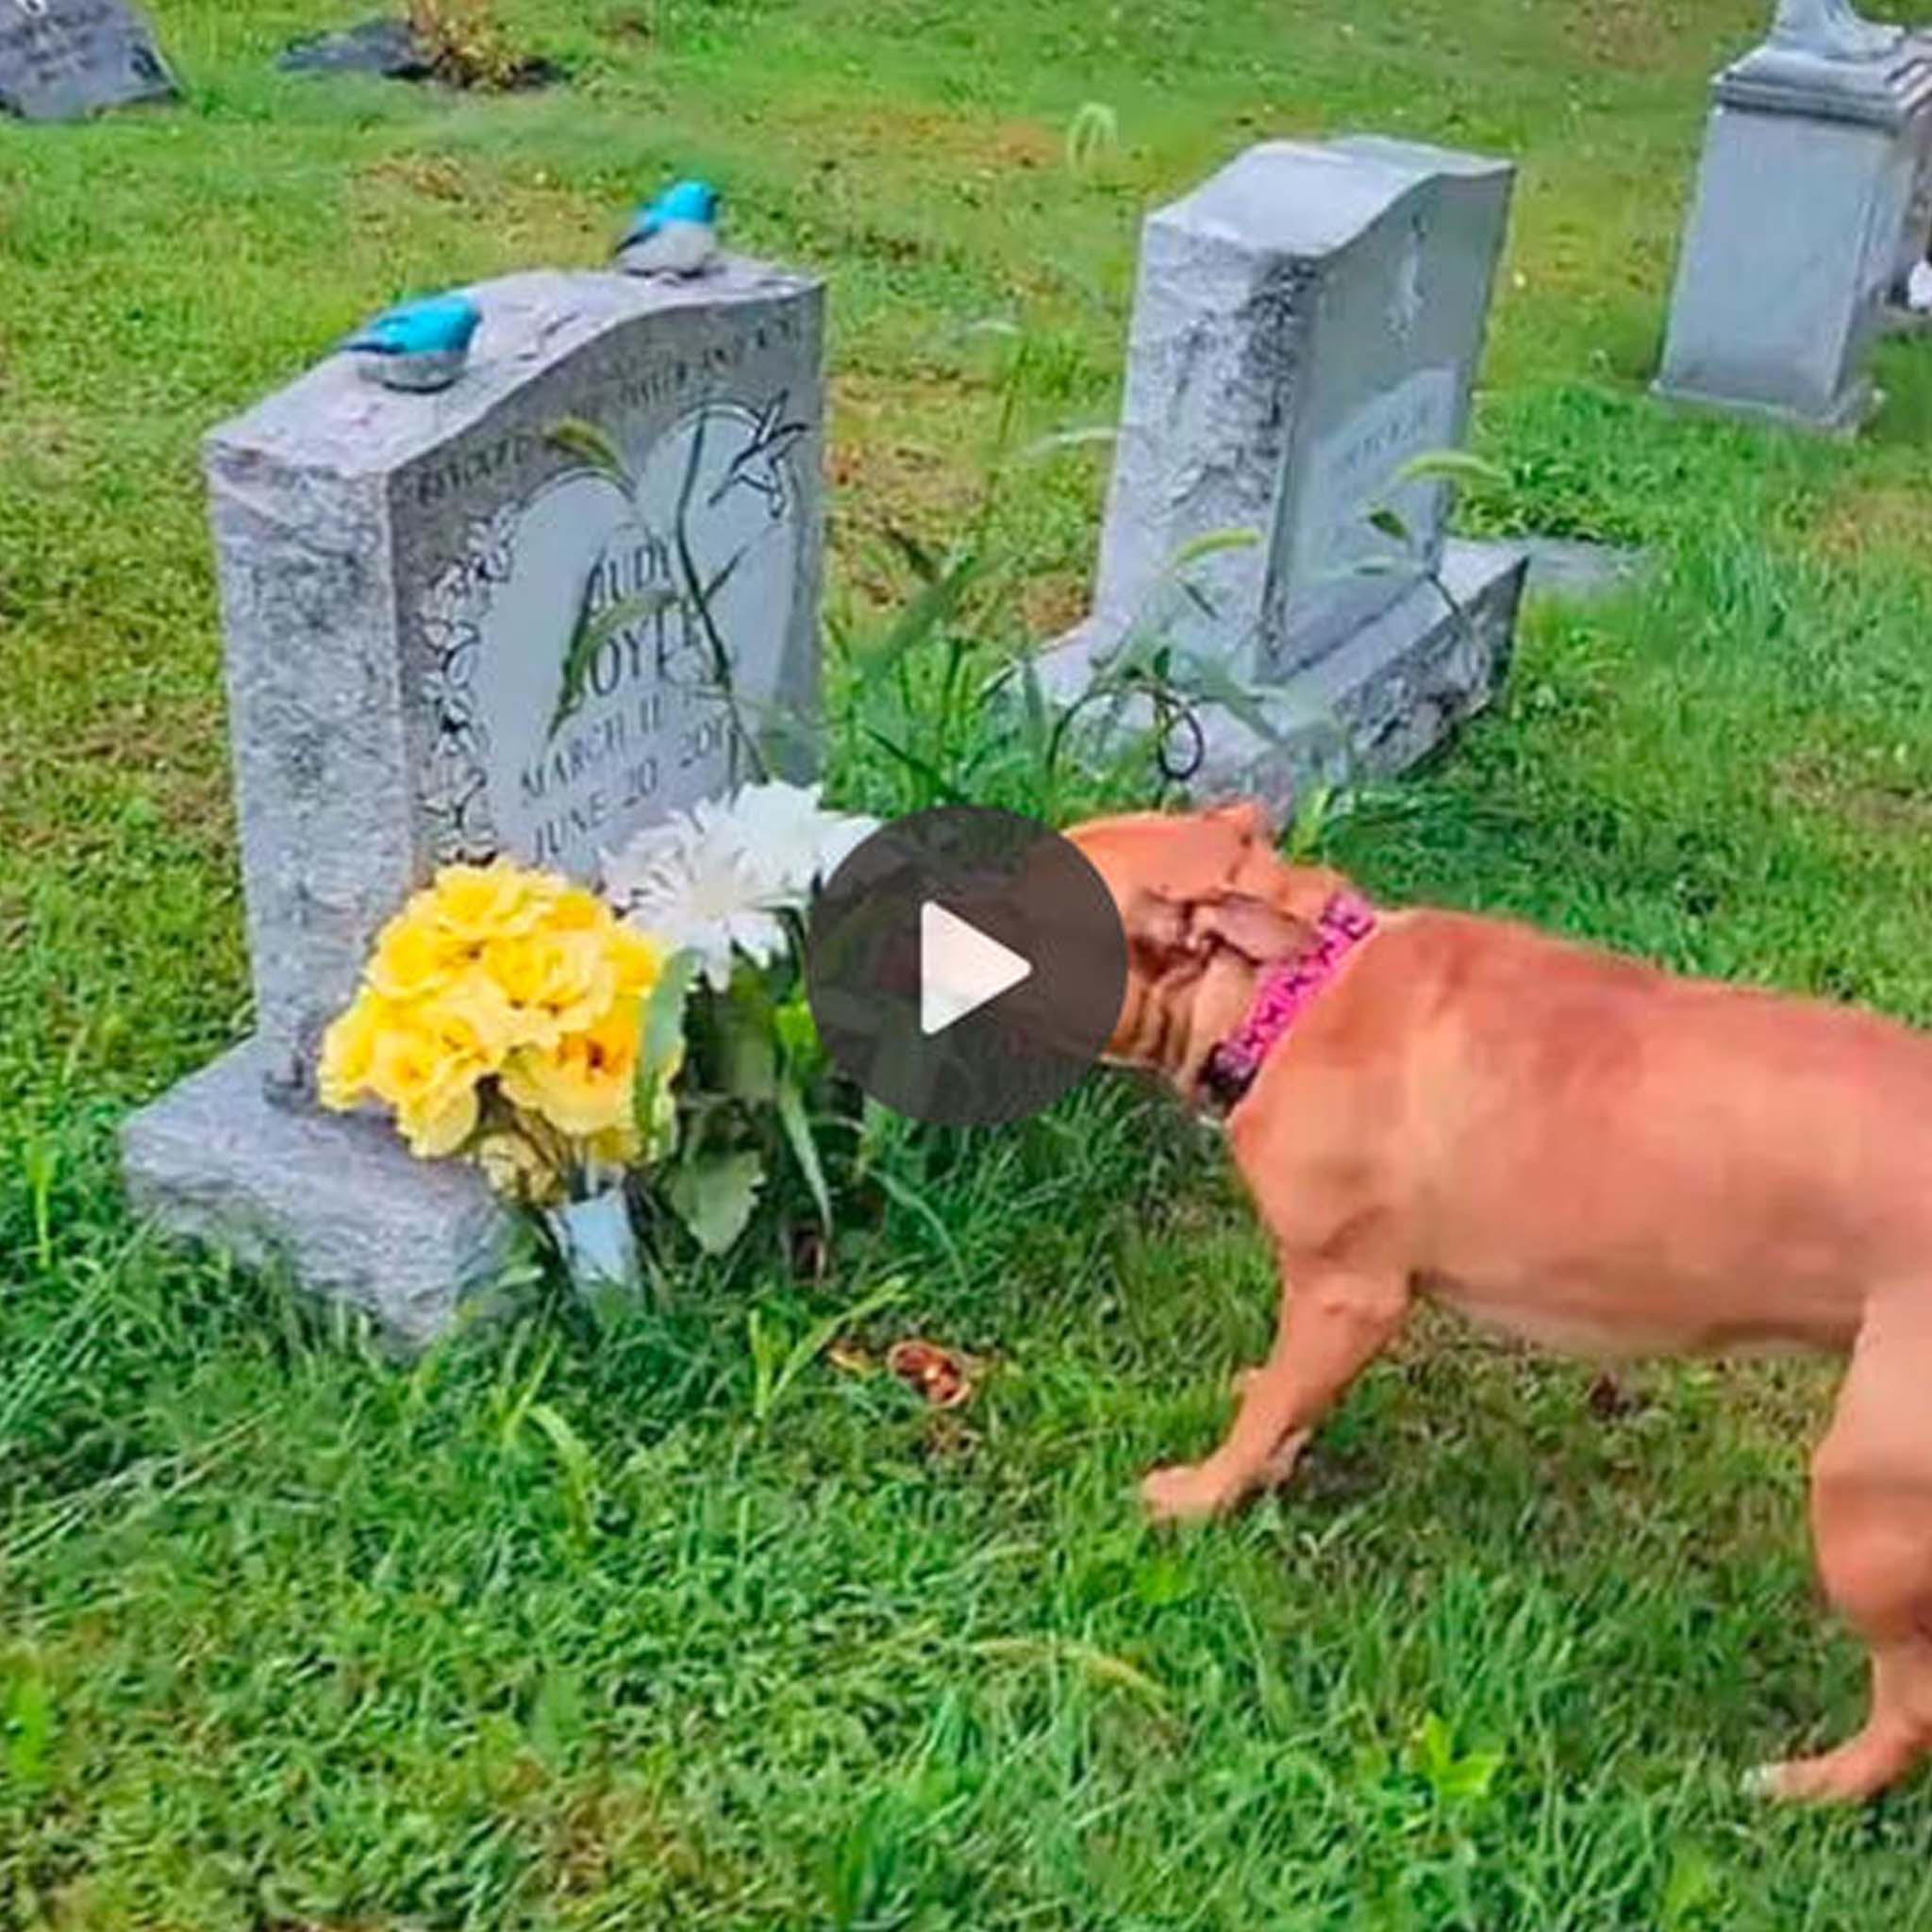 “A Heartfelt Moment: A Deeply Connected Puppy Recognizes His Beloved Grandma’s Final Resting Place.”